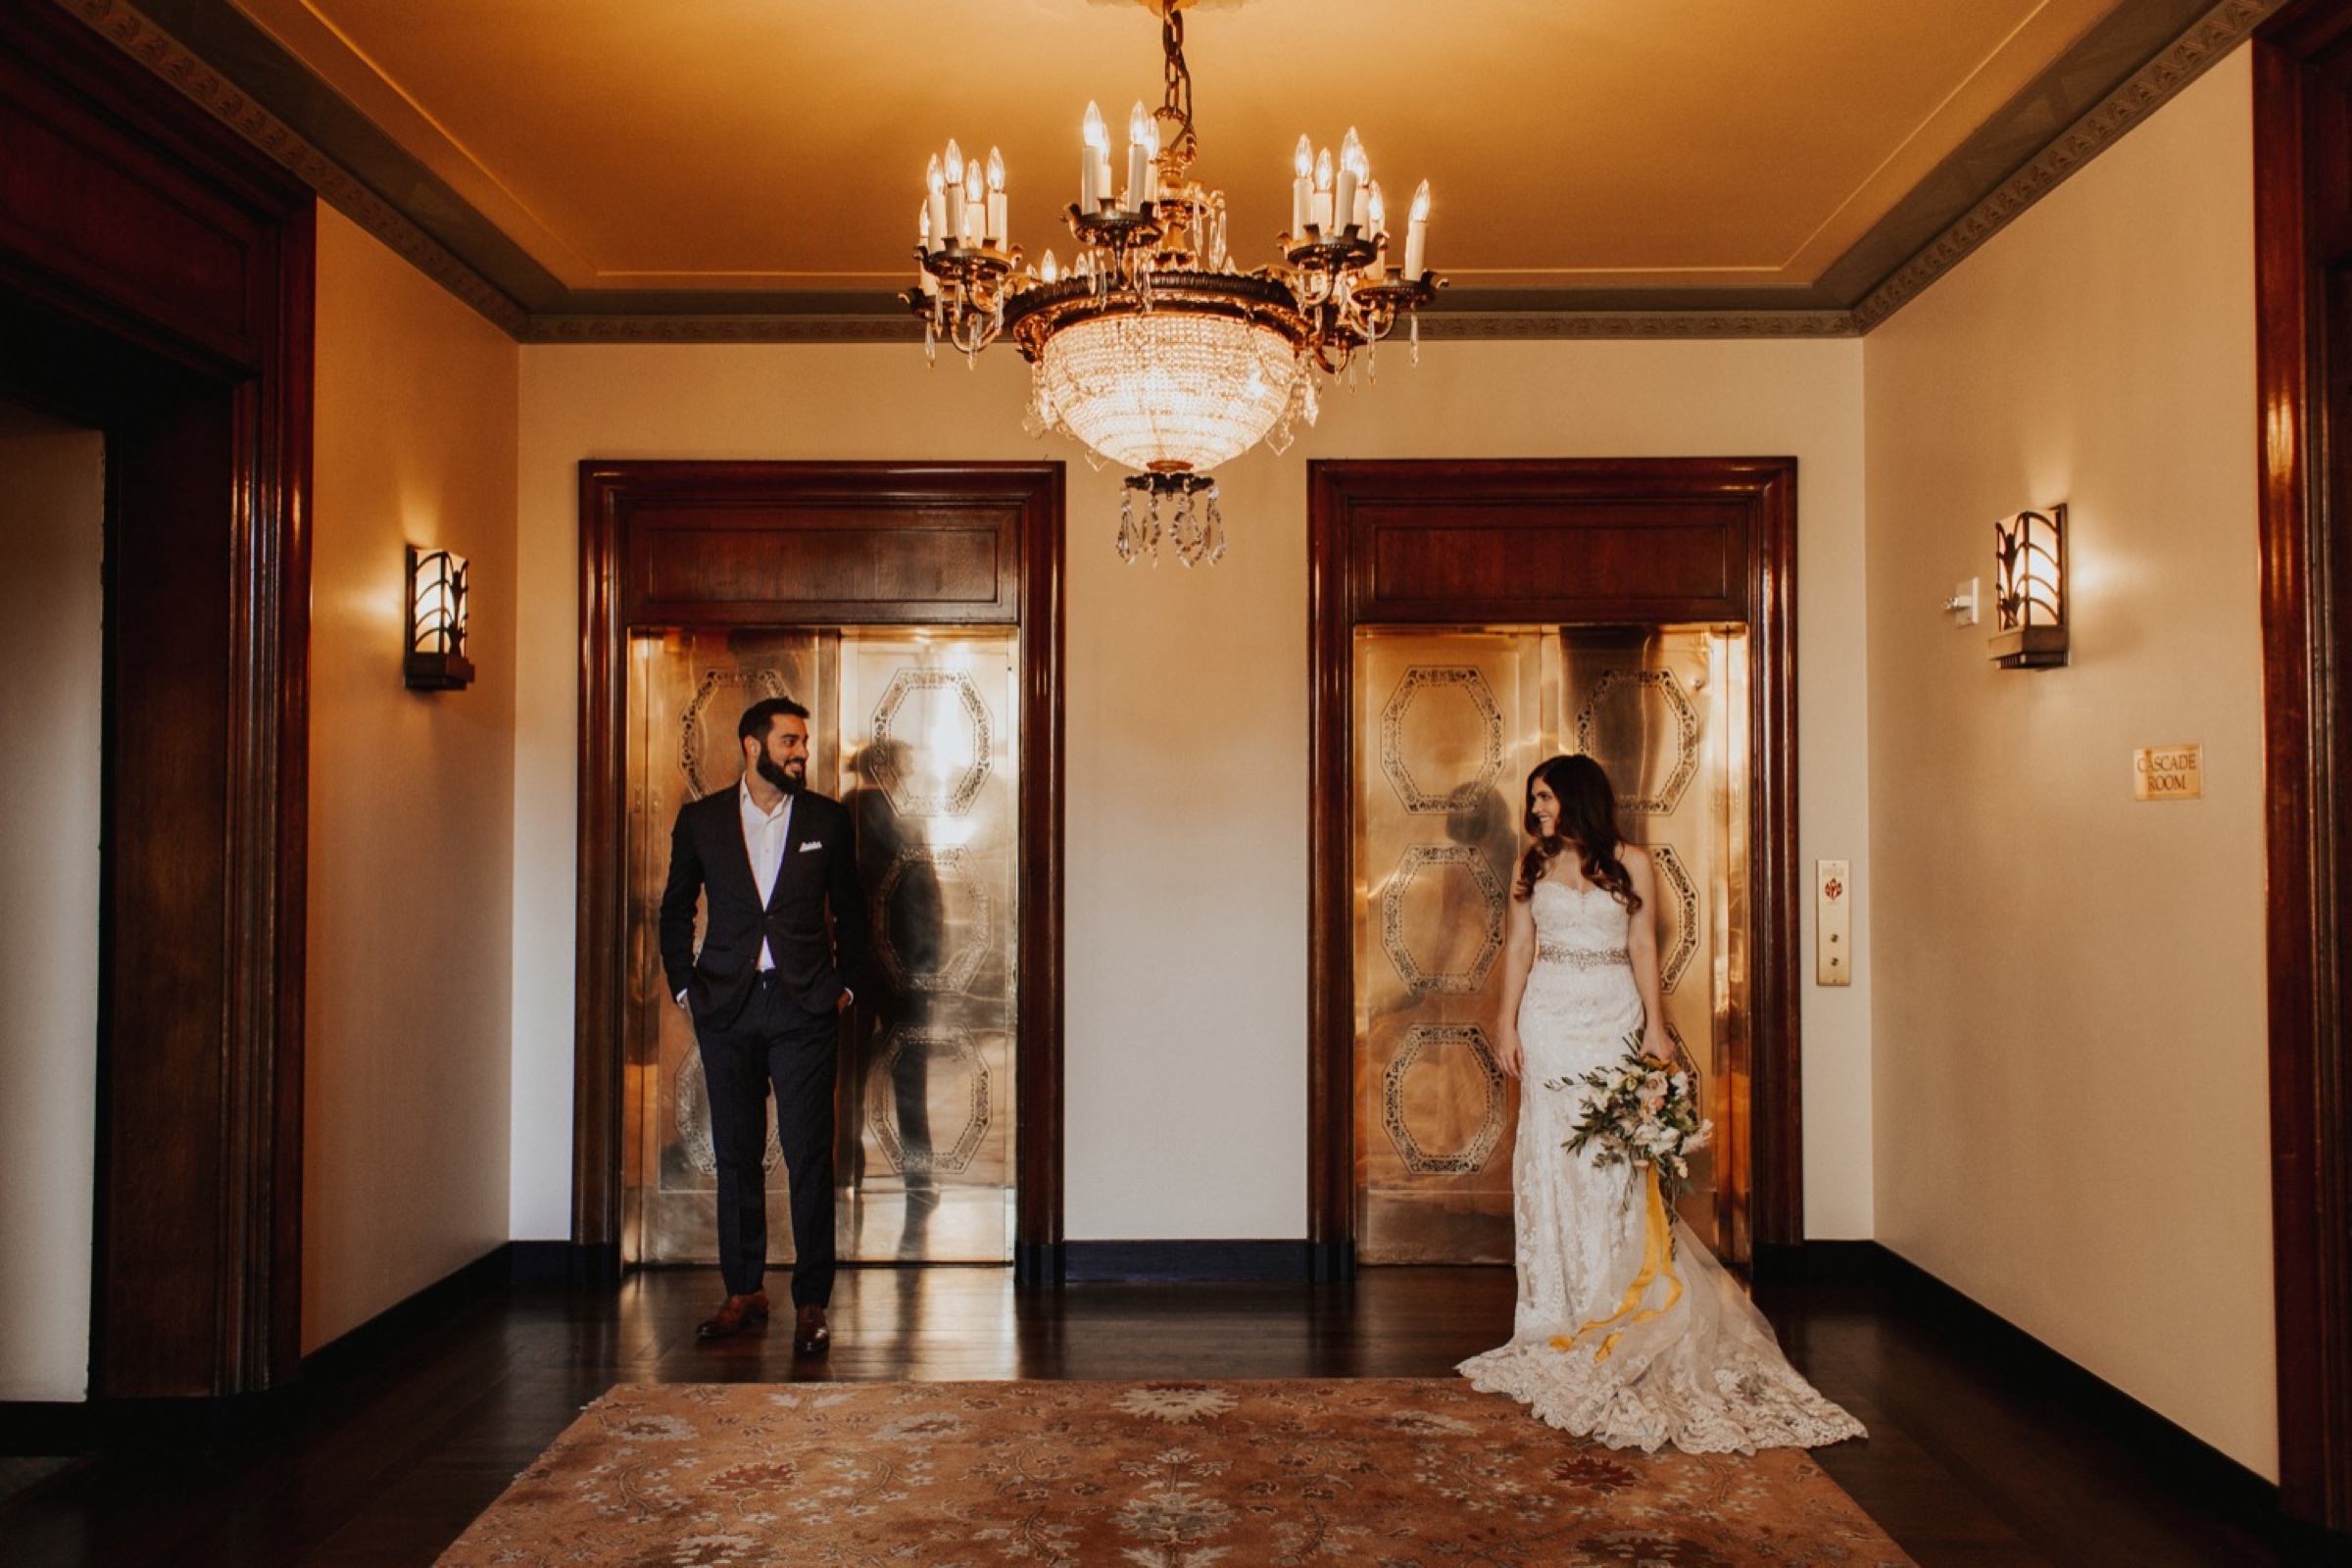 Wedding photos at the Rainier Club in Seattle by Sarah Anne Photography